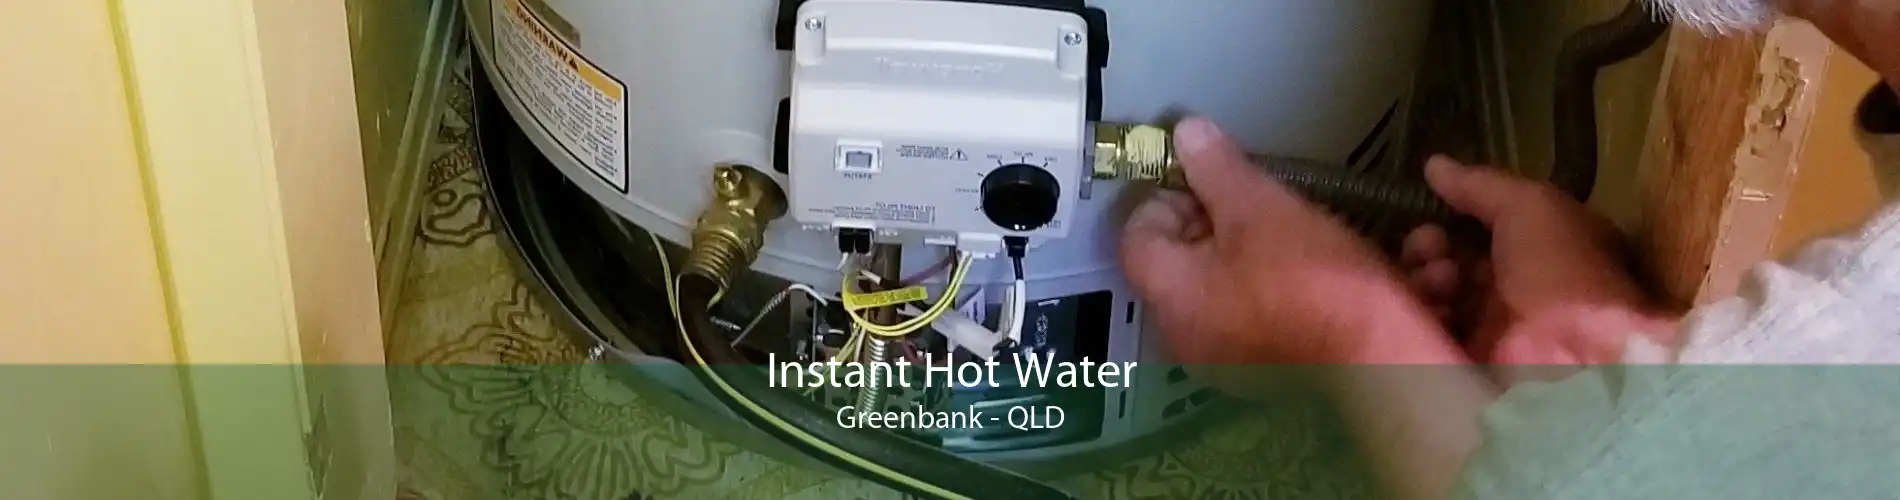 Instant Hot Water Greenbank - QLD